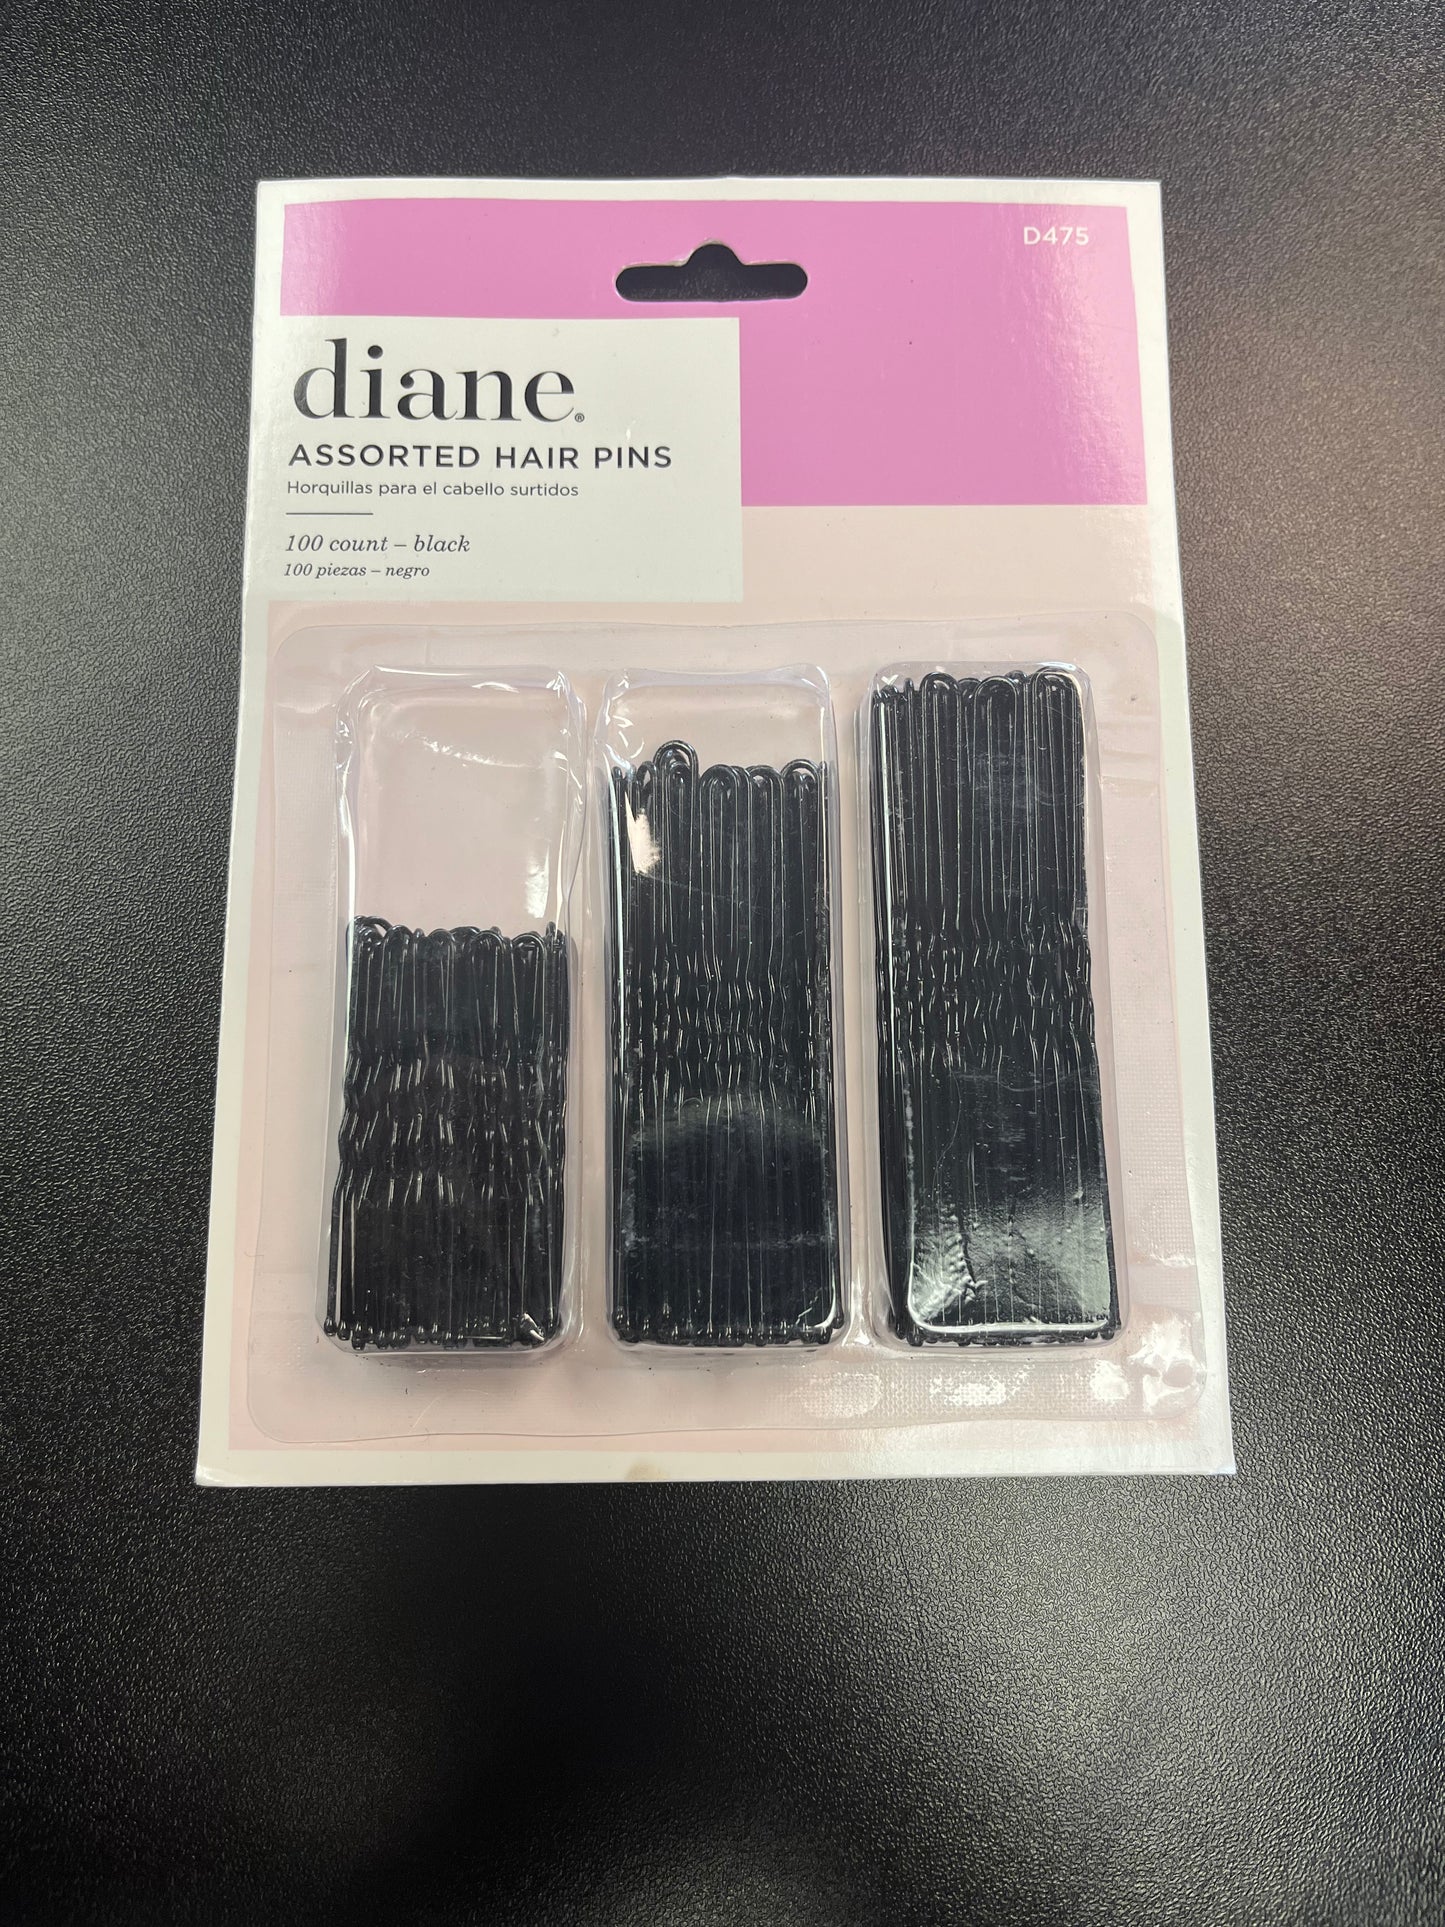 HAIR PINS BLACK 100-PACK-(40-1.75 INCH, 30-2.5 INCH, 30-3 INCH) ASSORTED